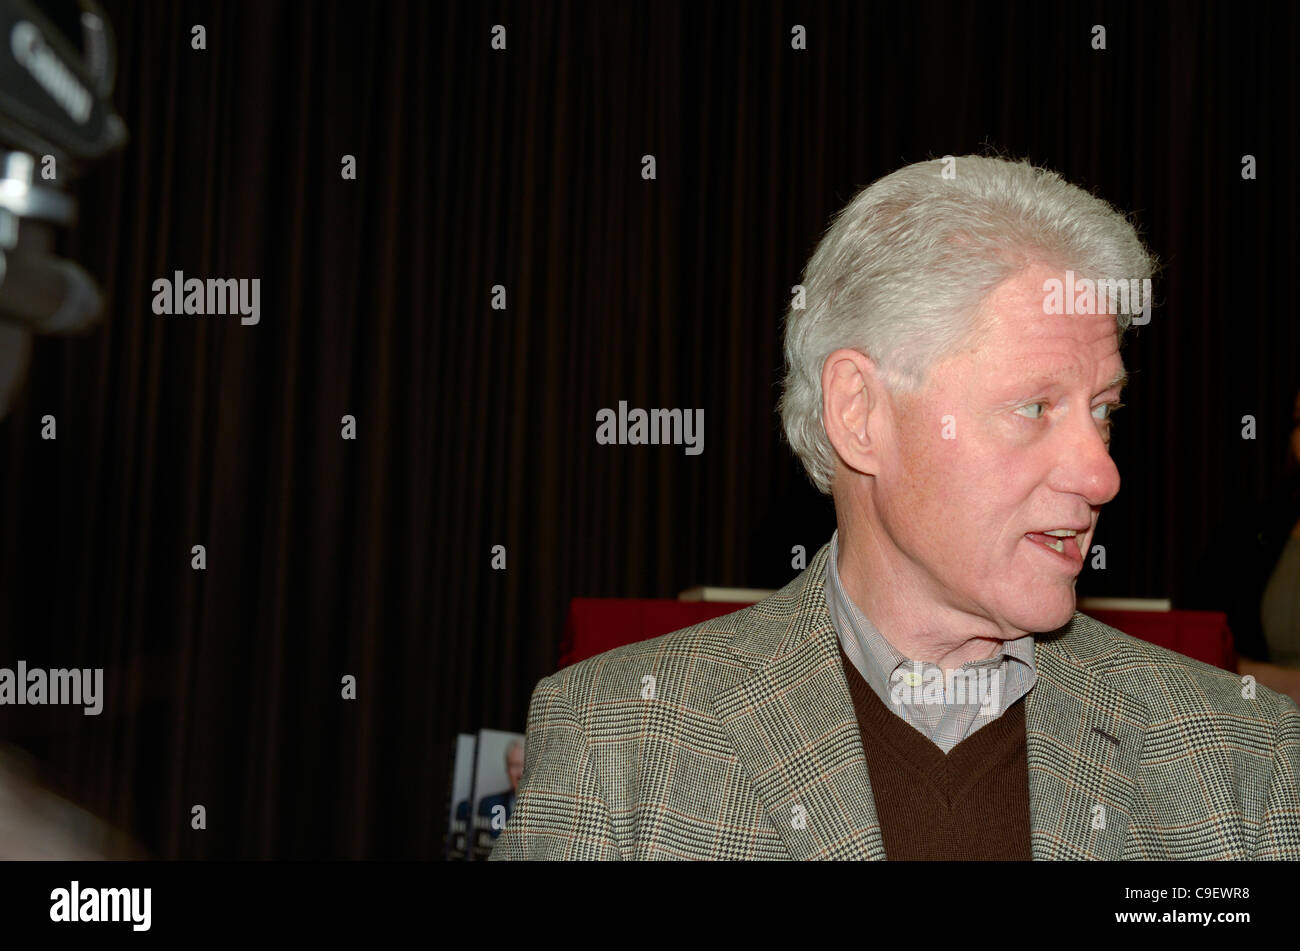 Portrait of former US President Bill Clinton taken during book signing event for Back to Work at his hometown library in Chappaqua, New York. More than 500 people attended the book signing on Friday, December 9, 2011. Stock Photo